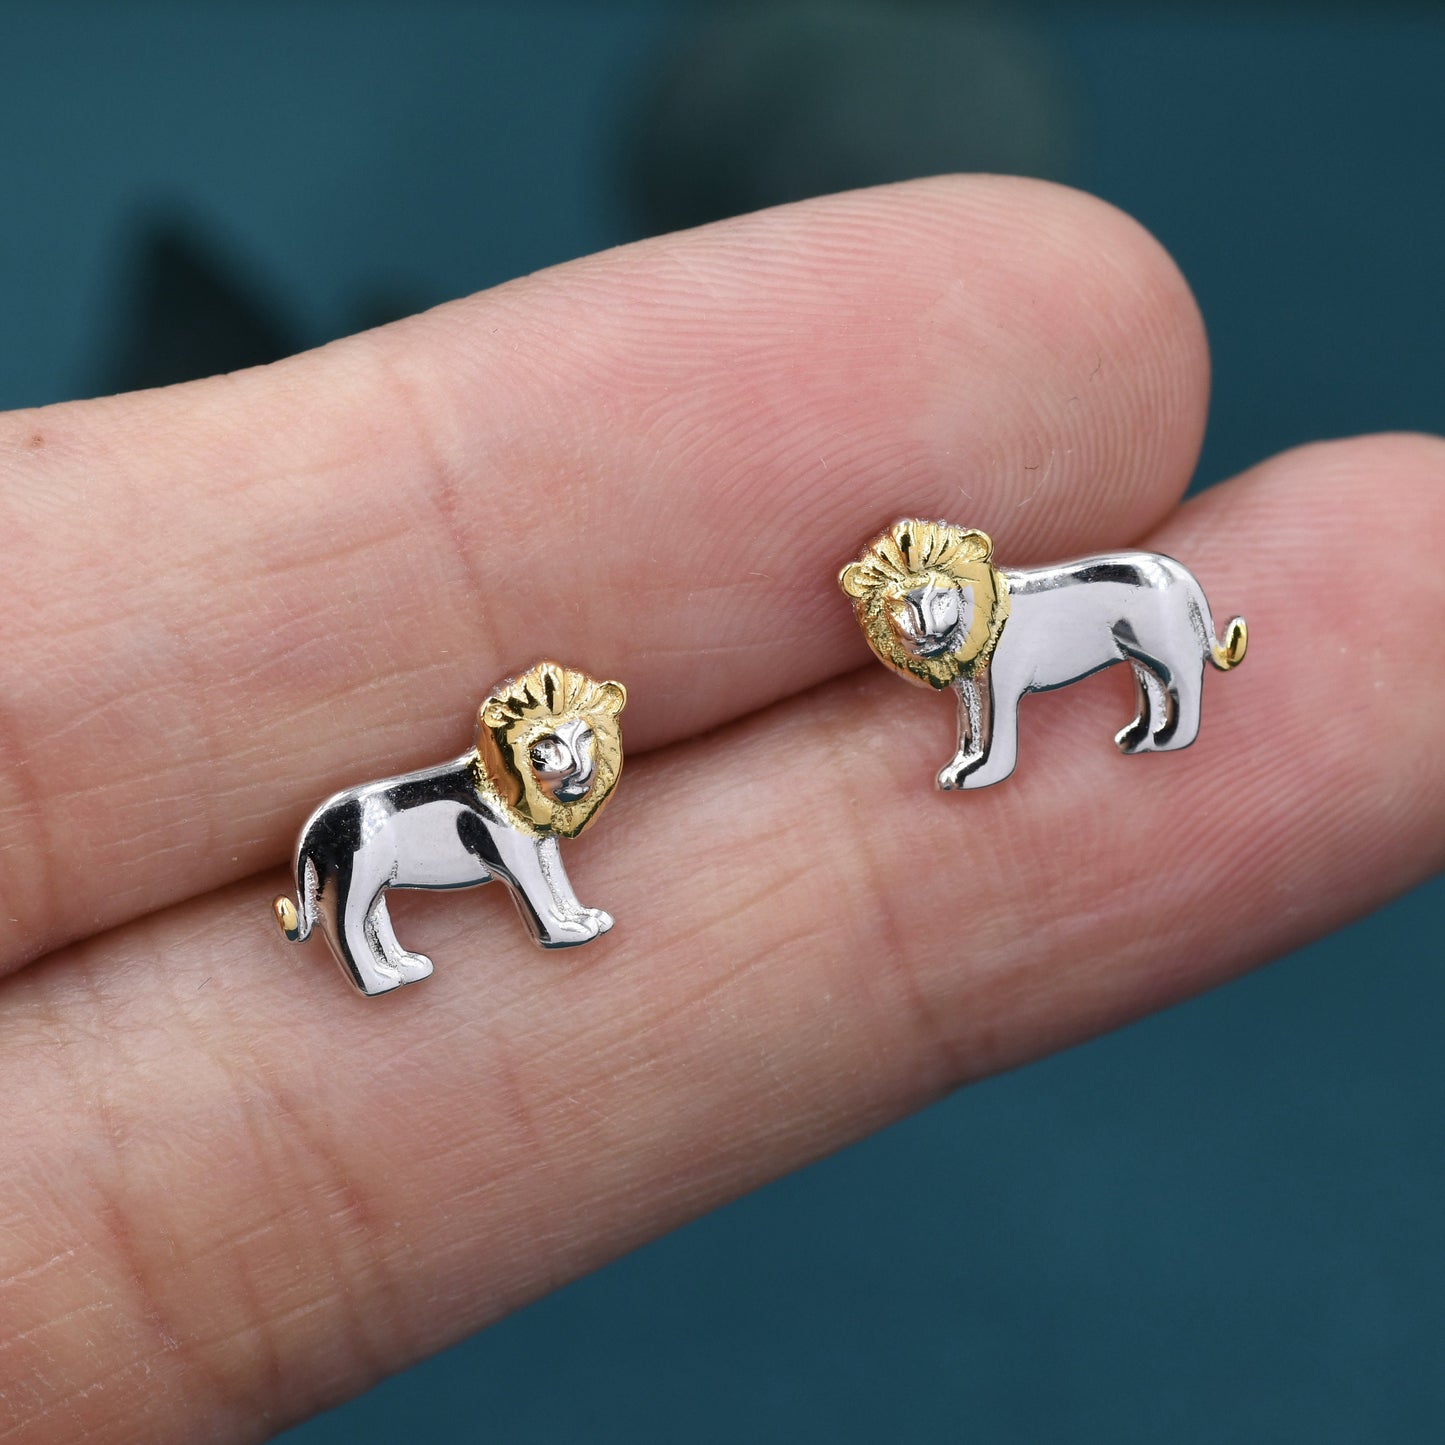 Tiny Little Lion Stud Earrings in Sterling Silver - Two Tone Gold and Silver Earrings - Cute Animal Earrings -  Fun, Whimsical